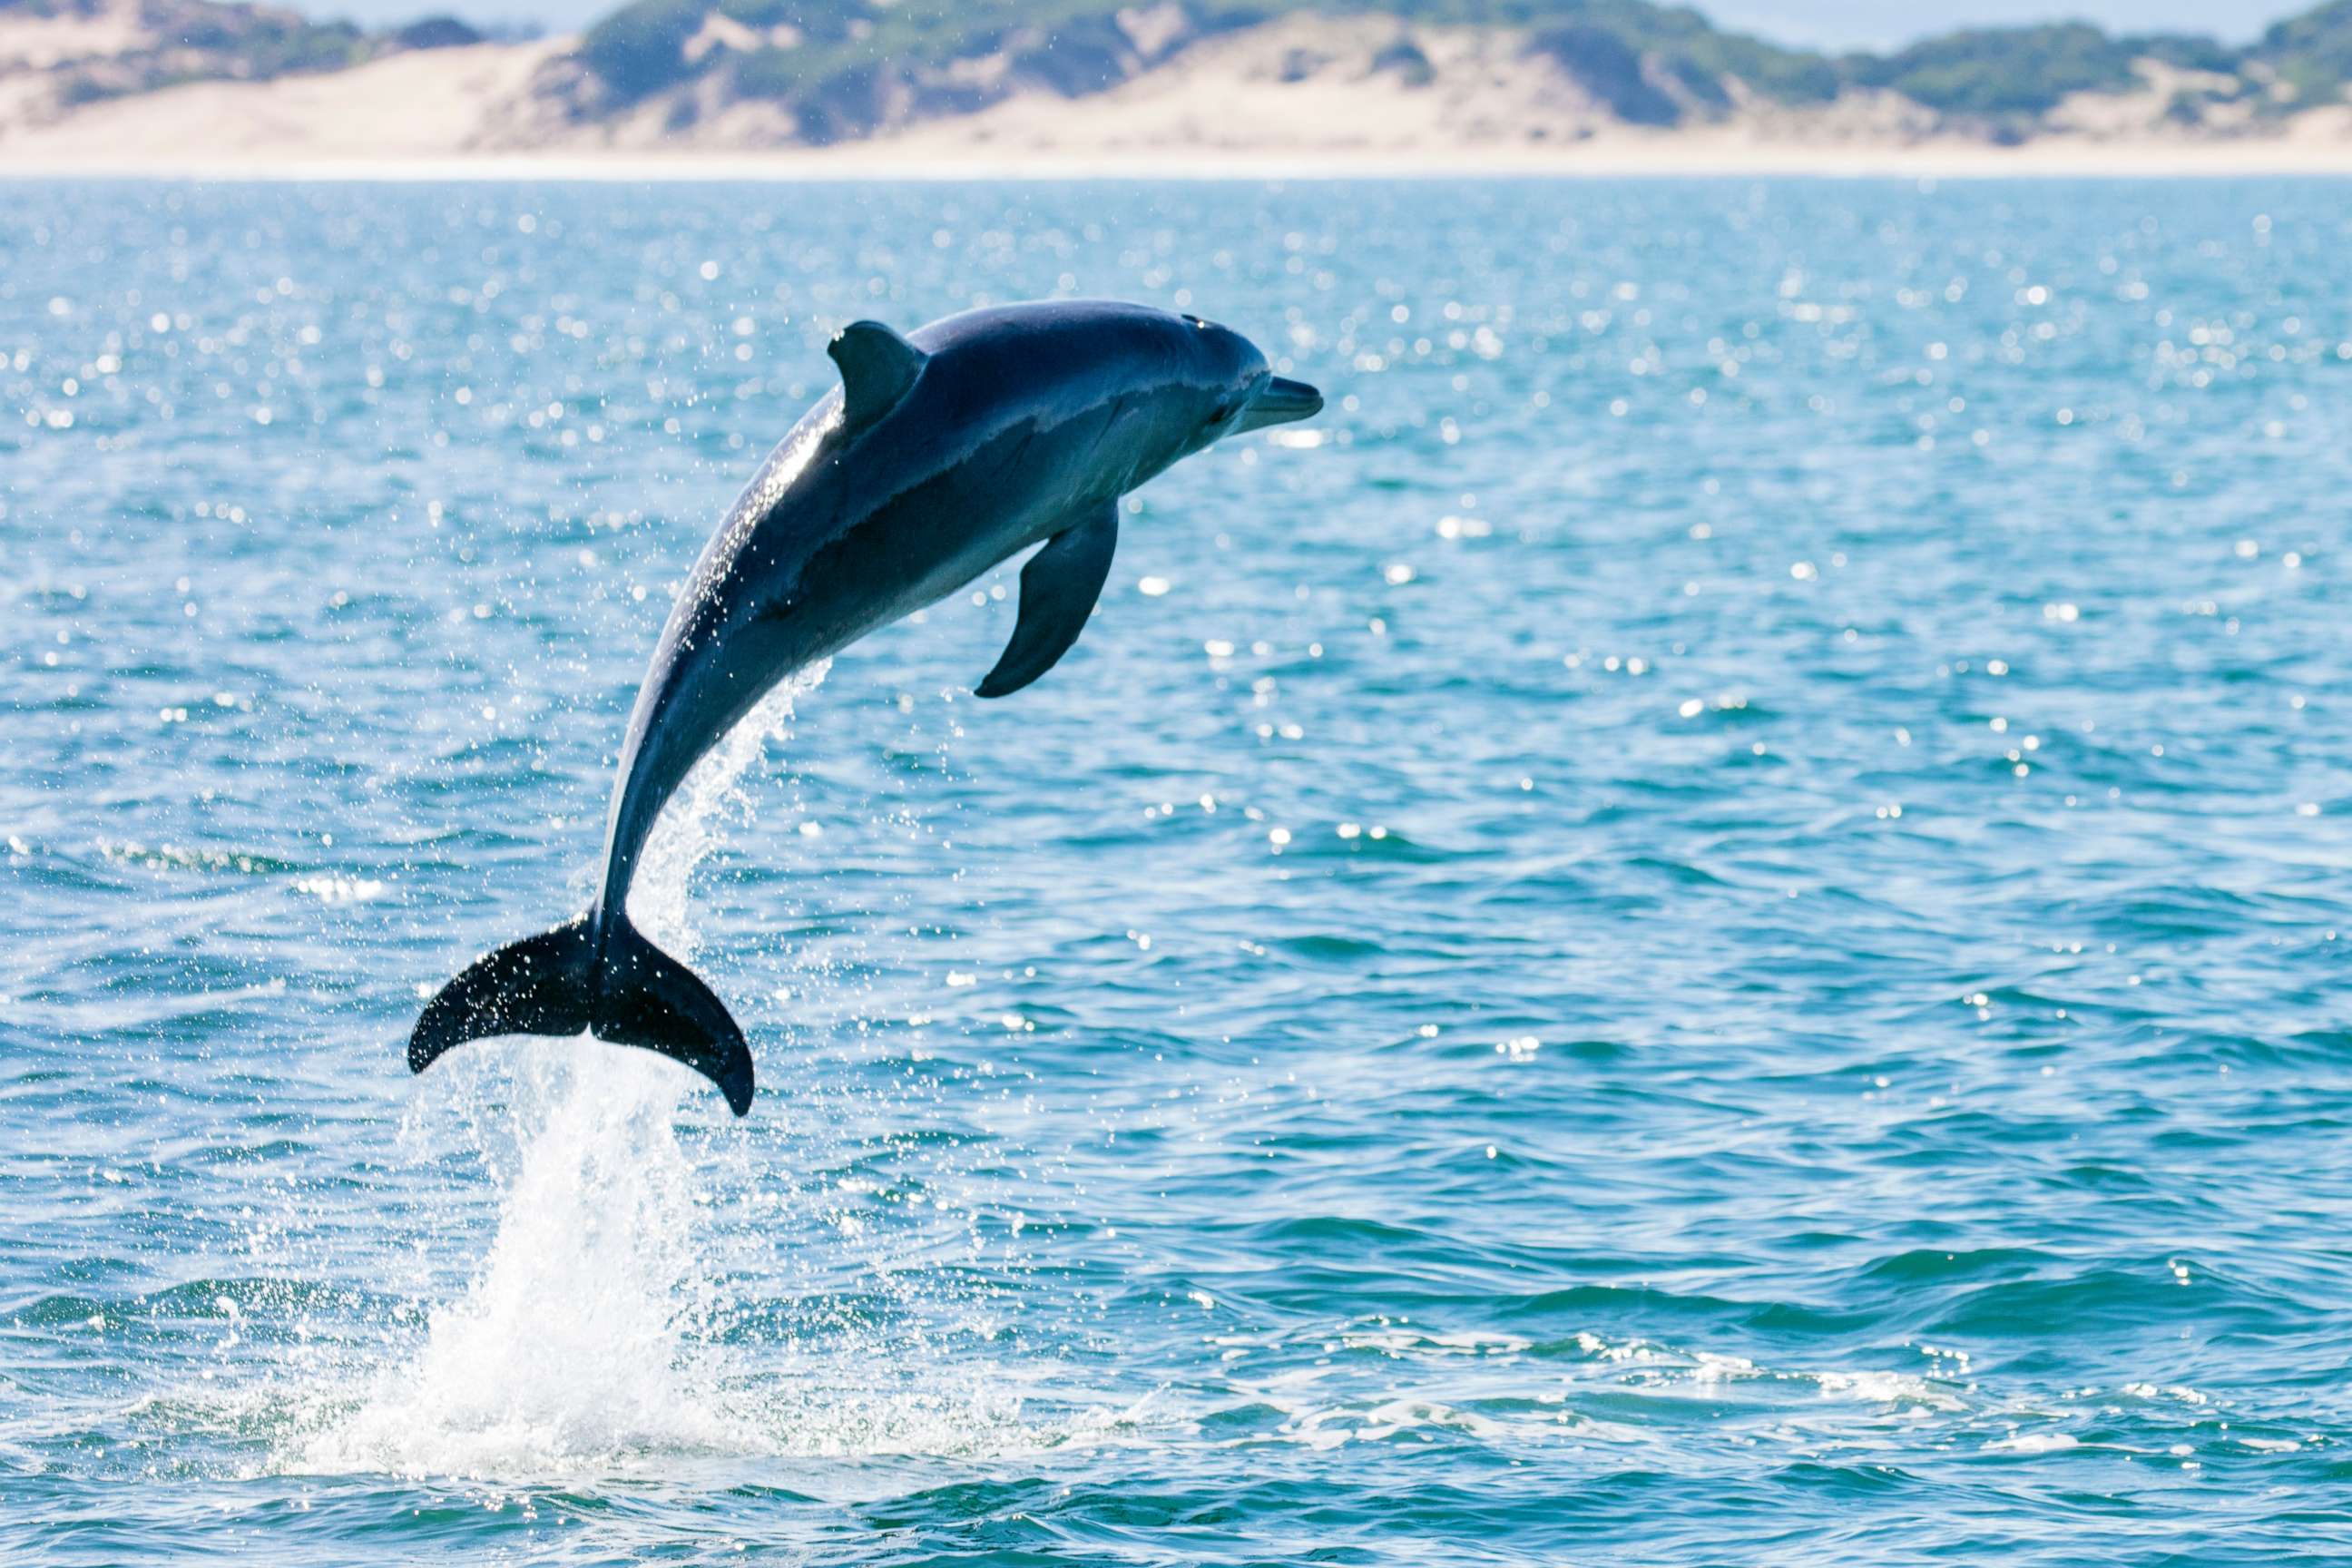 PHOTO: A dolphin leaps from the sea in this stock photo.